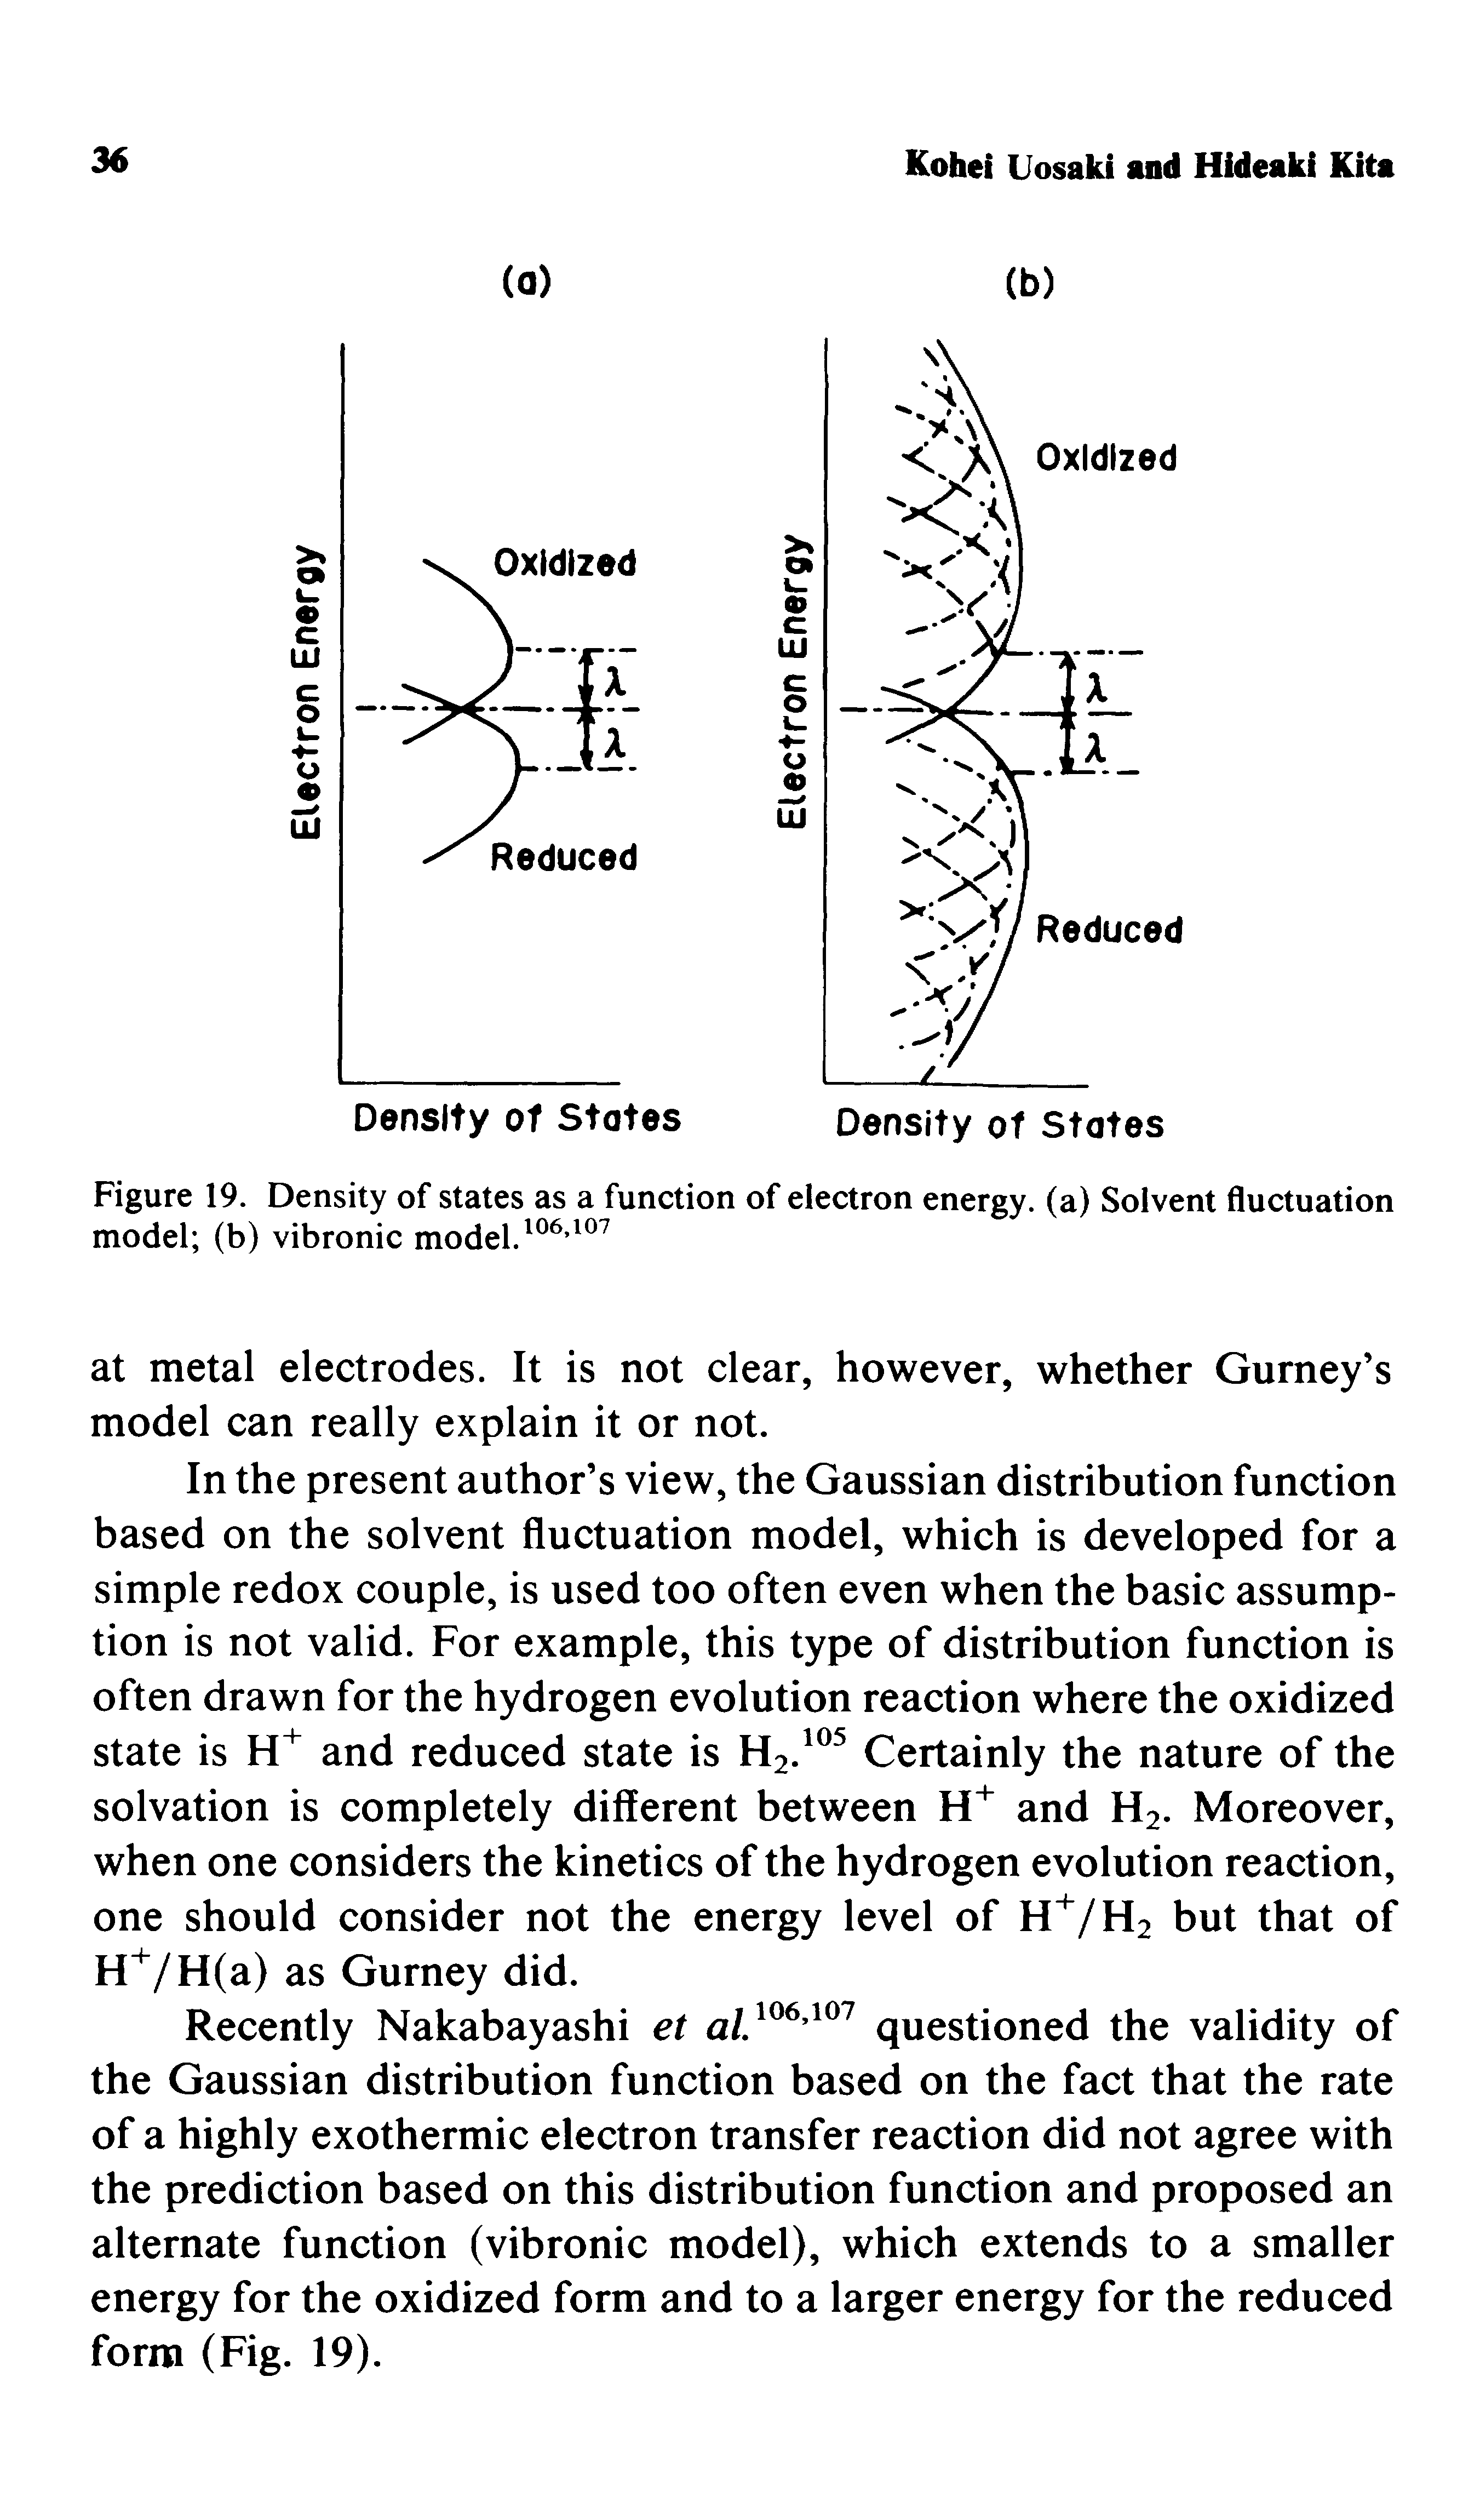 Figure 19. Density of states as a function of electron energy, (a) Solvent fluctuation model (b) vibronic model.106,107...